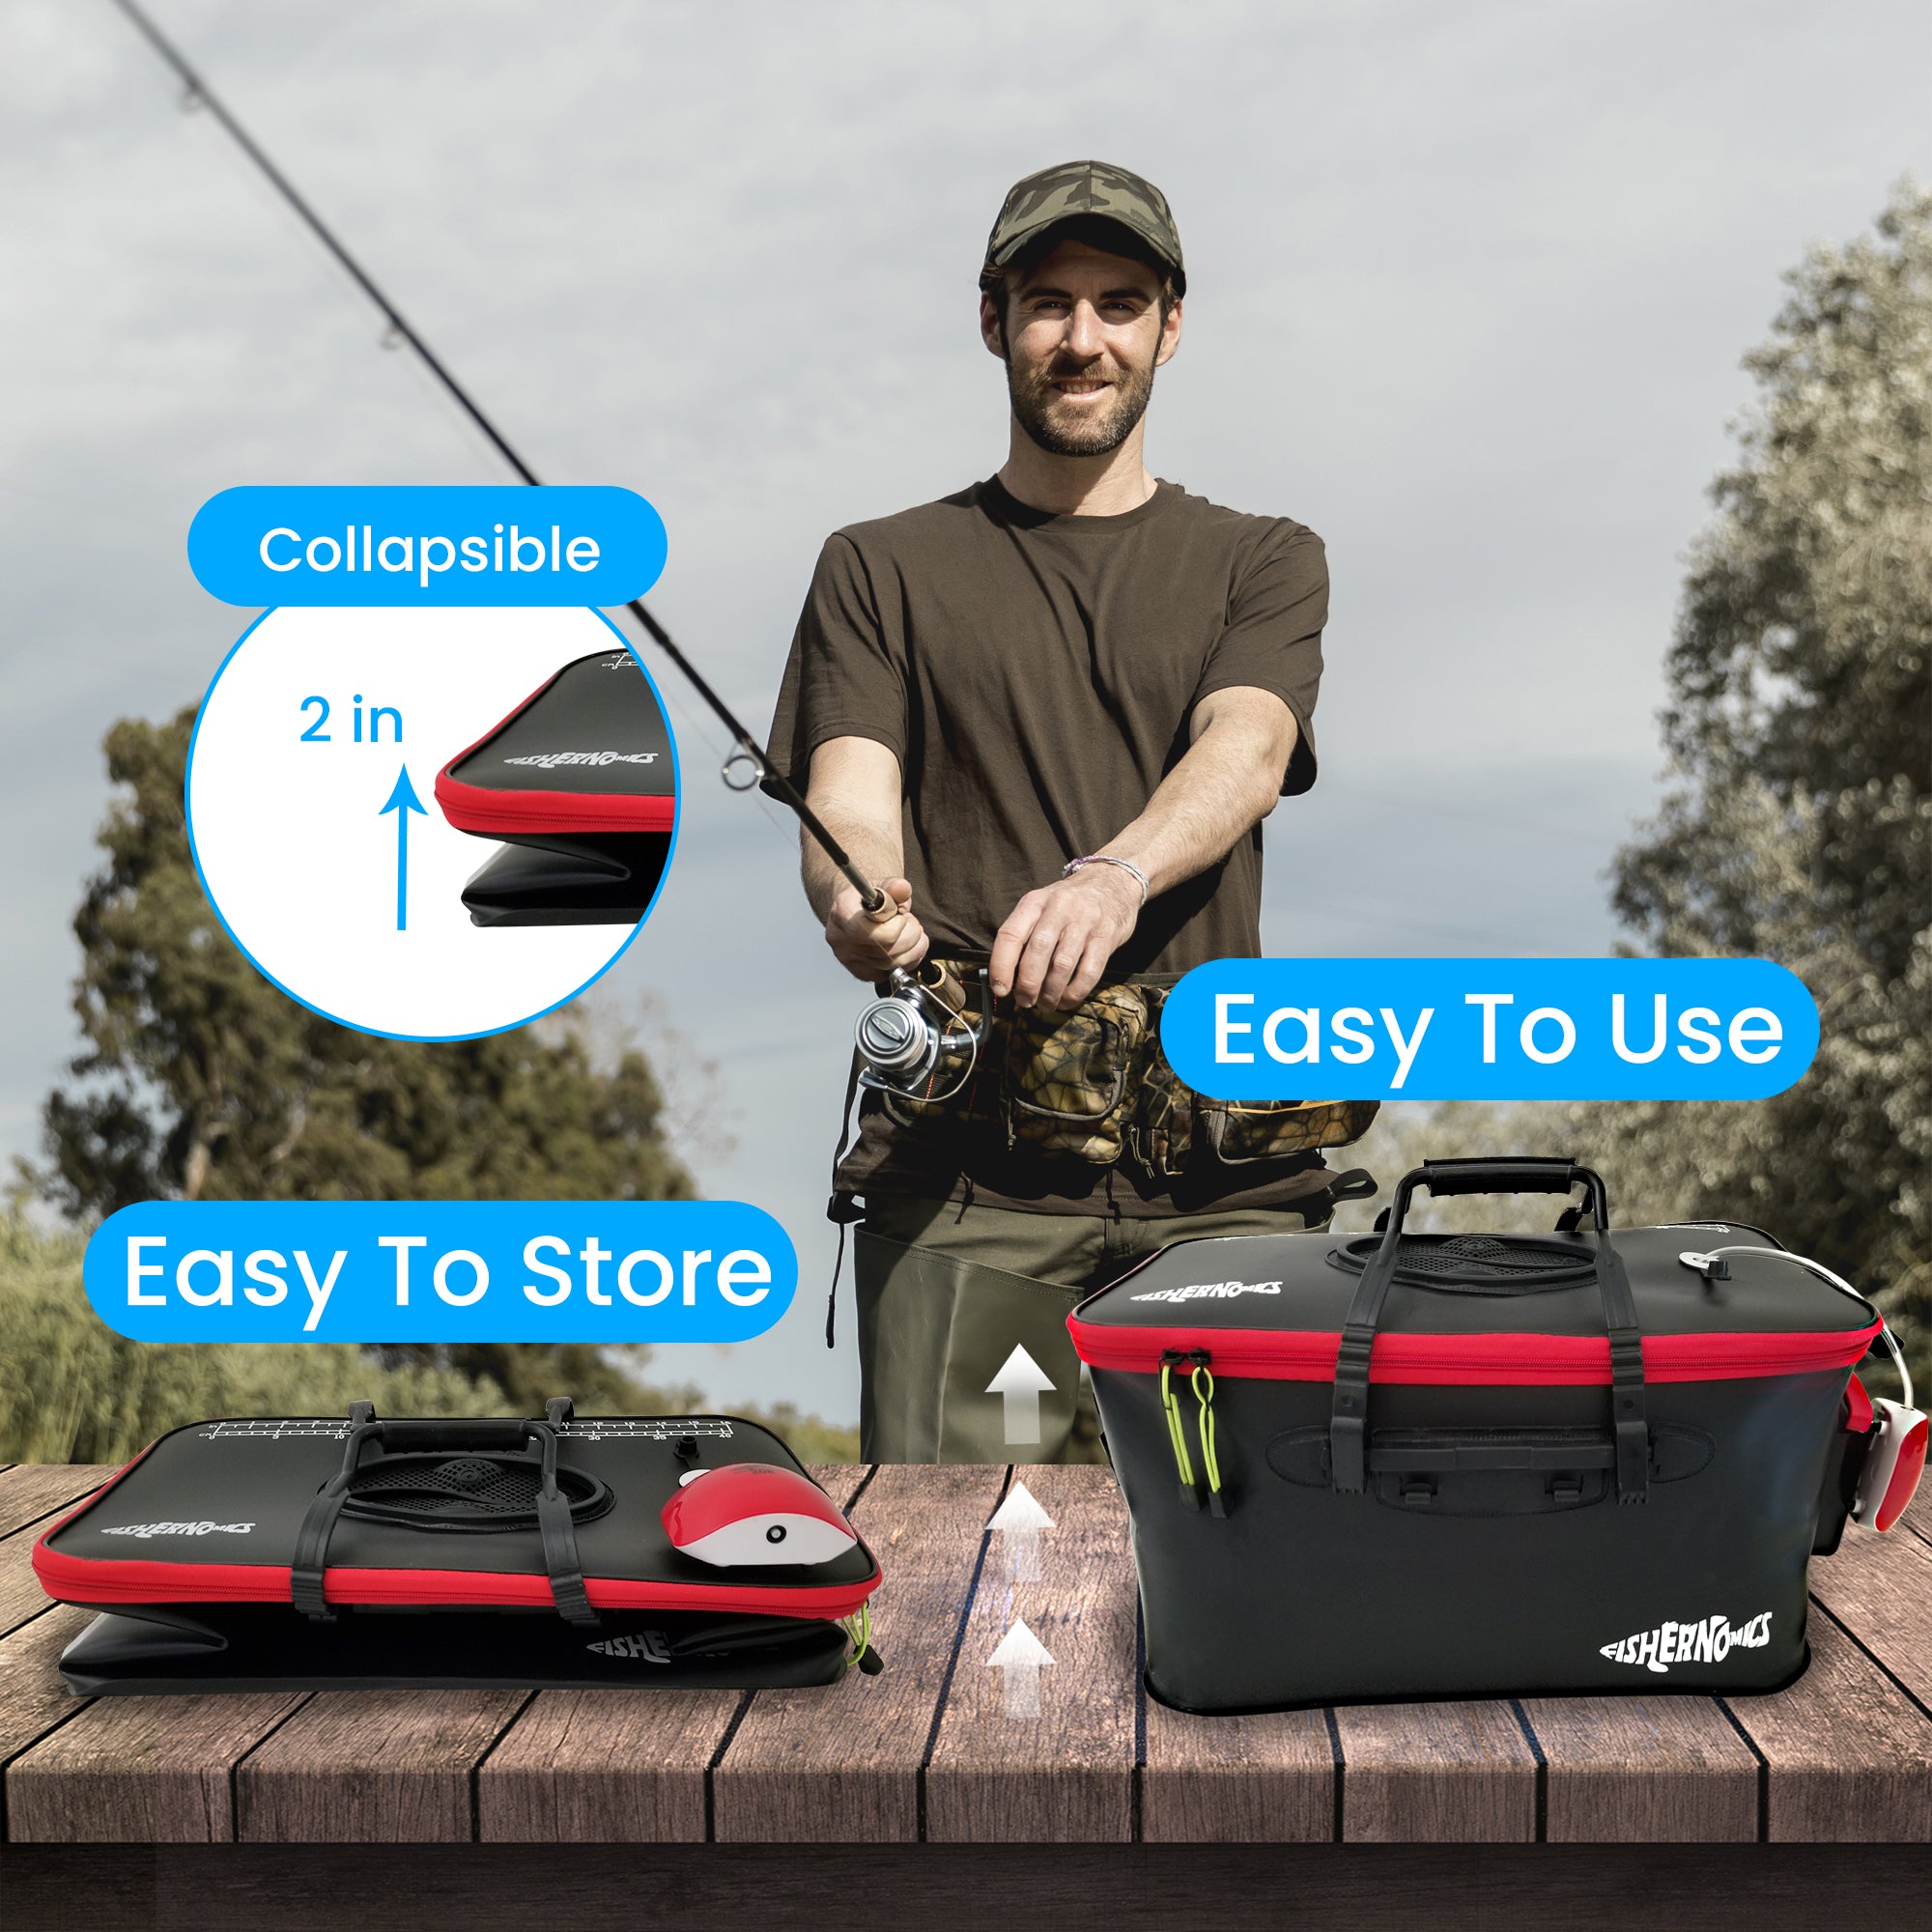 Cheers.us Fishing Bucket Foldable Fishing Bait Bucket Multifunctional Portable Folding Fishing Minnow Bucket Fish Live Bait Container Outdoor Camping